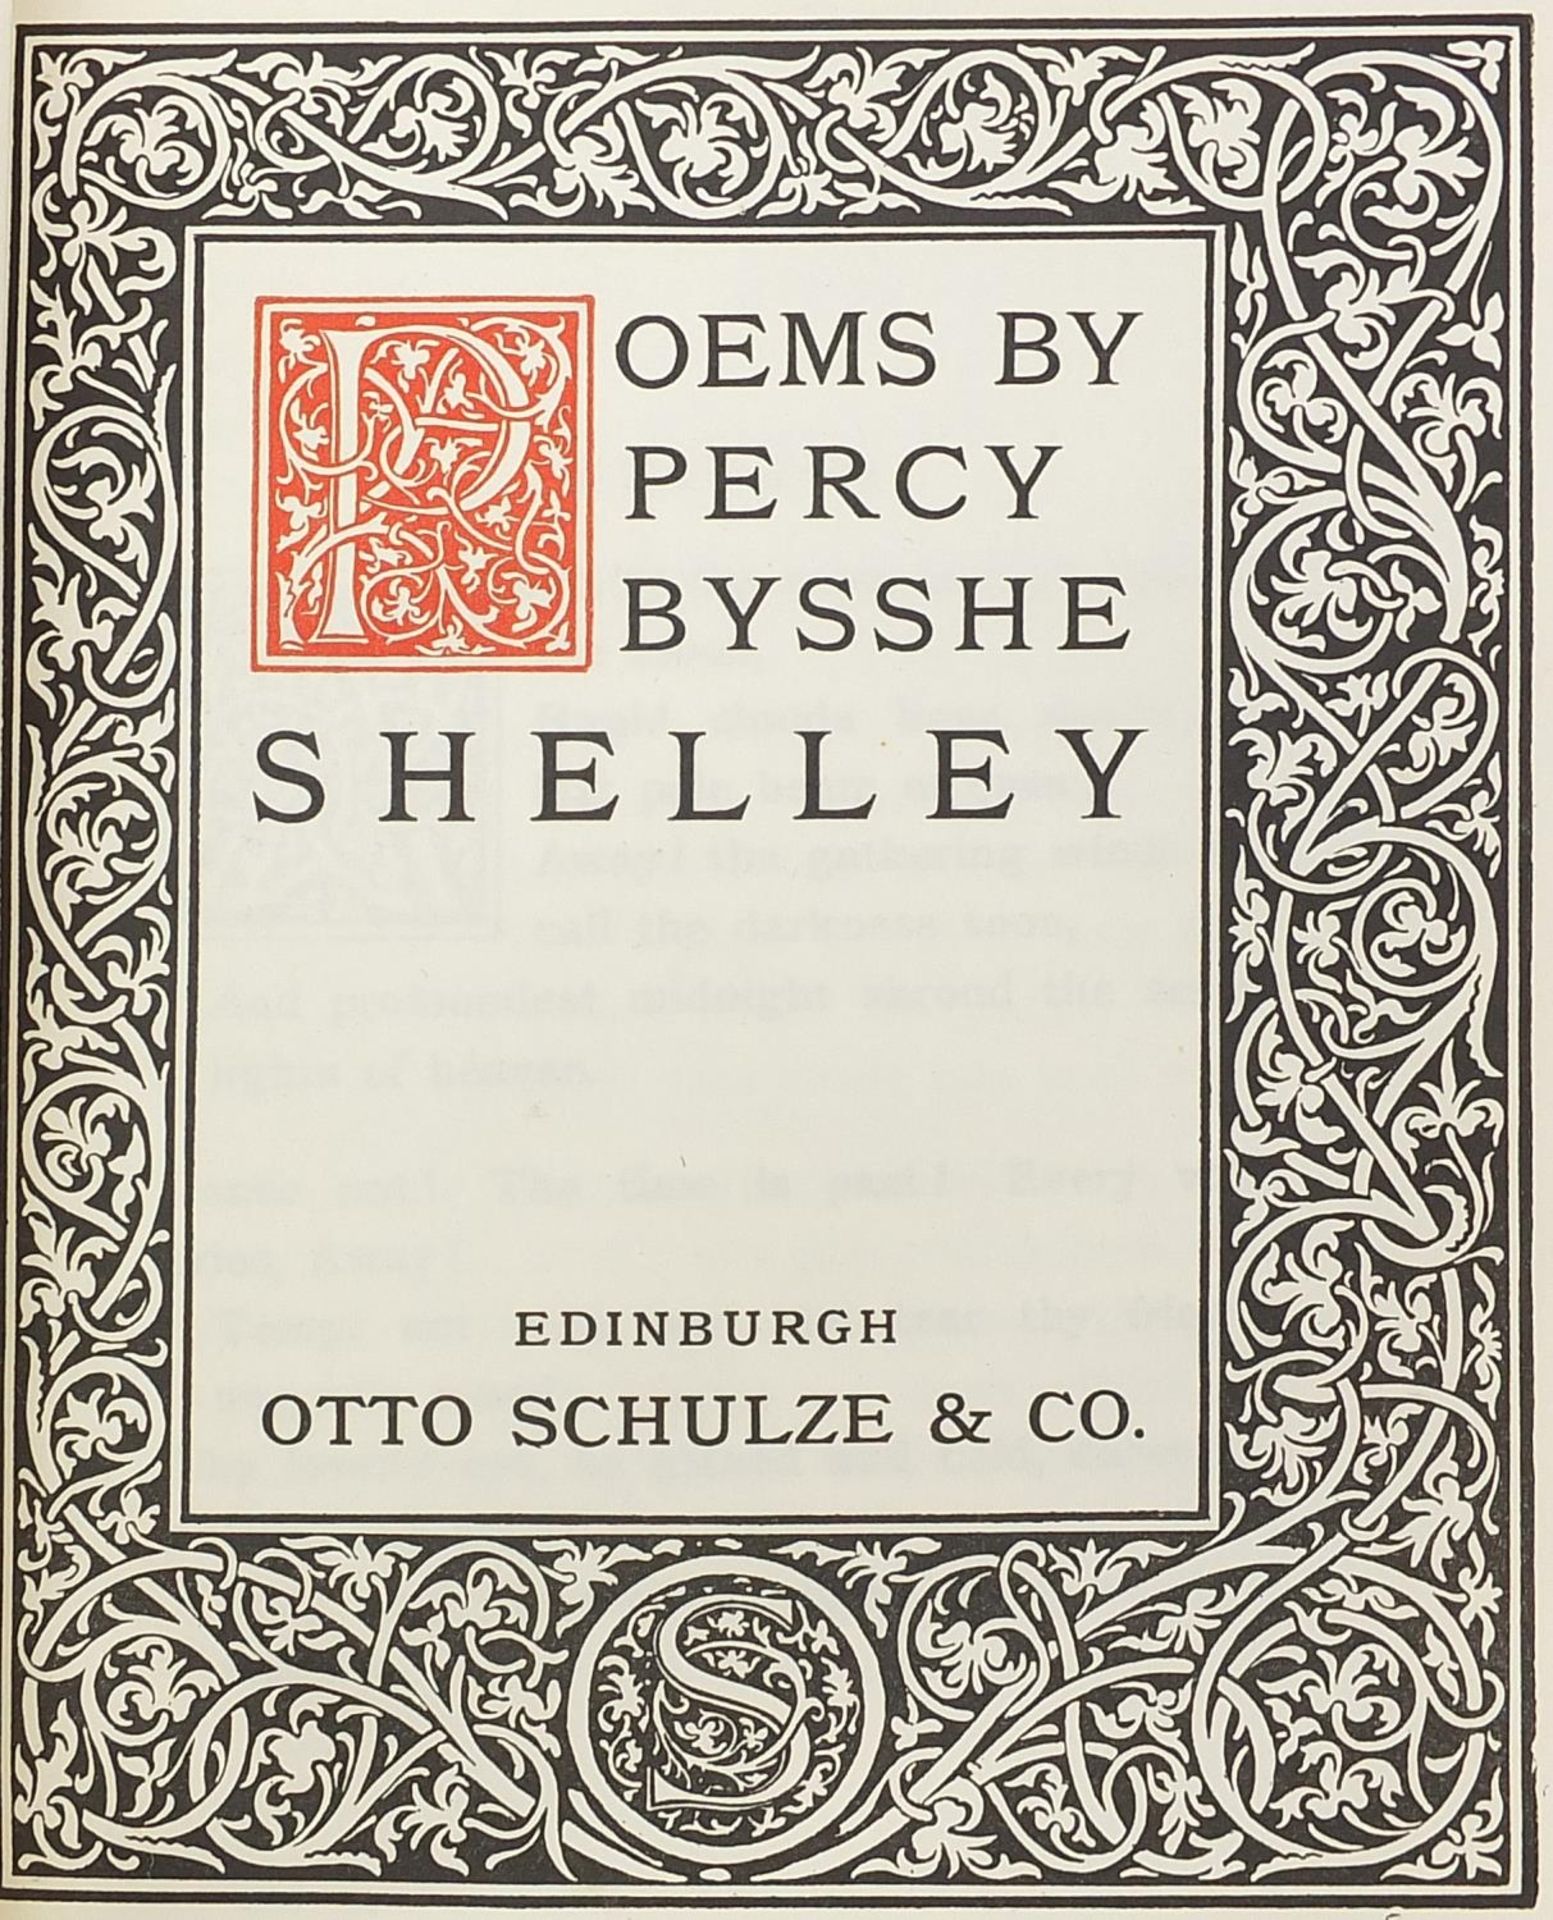 Poems by Percy Bysshe Shelley, tooled leather hardback book, edition of five hundred copies - Image 3 of 4